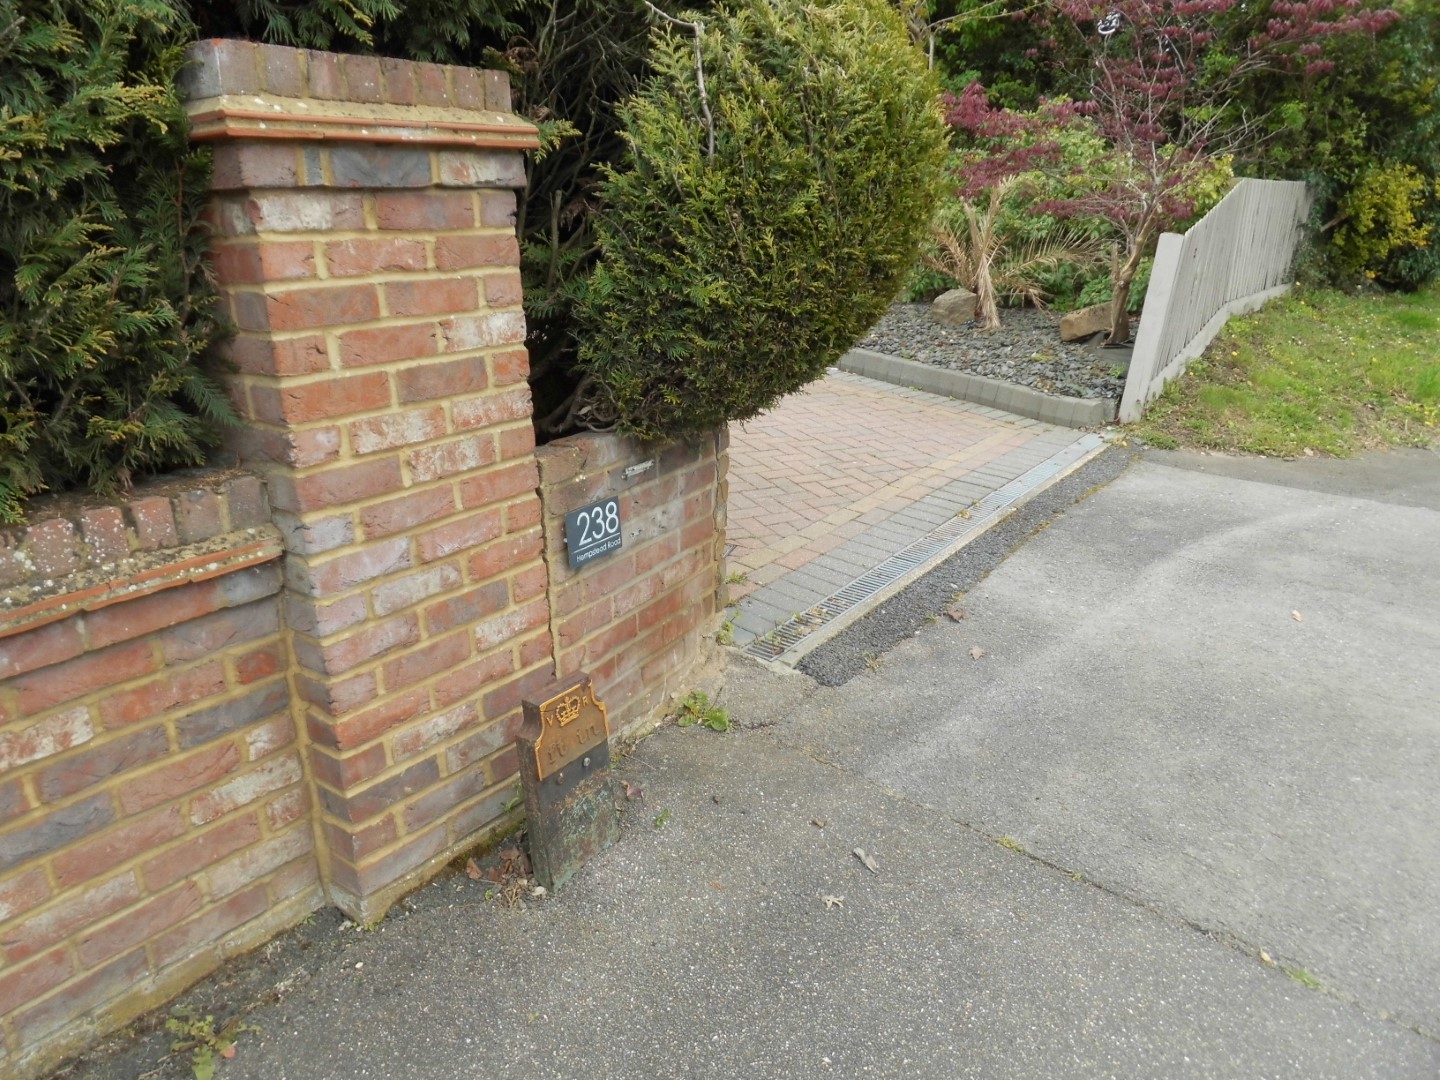 Telegraph cable marker post at 238 Hempstead Road, Watford by Derek Pattenson 